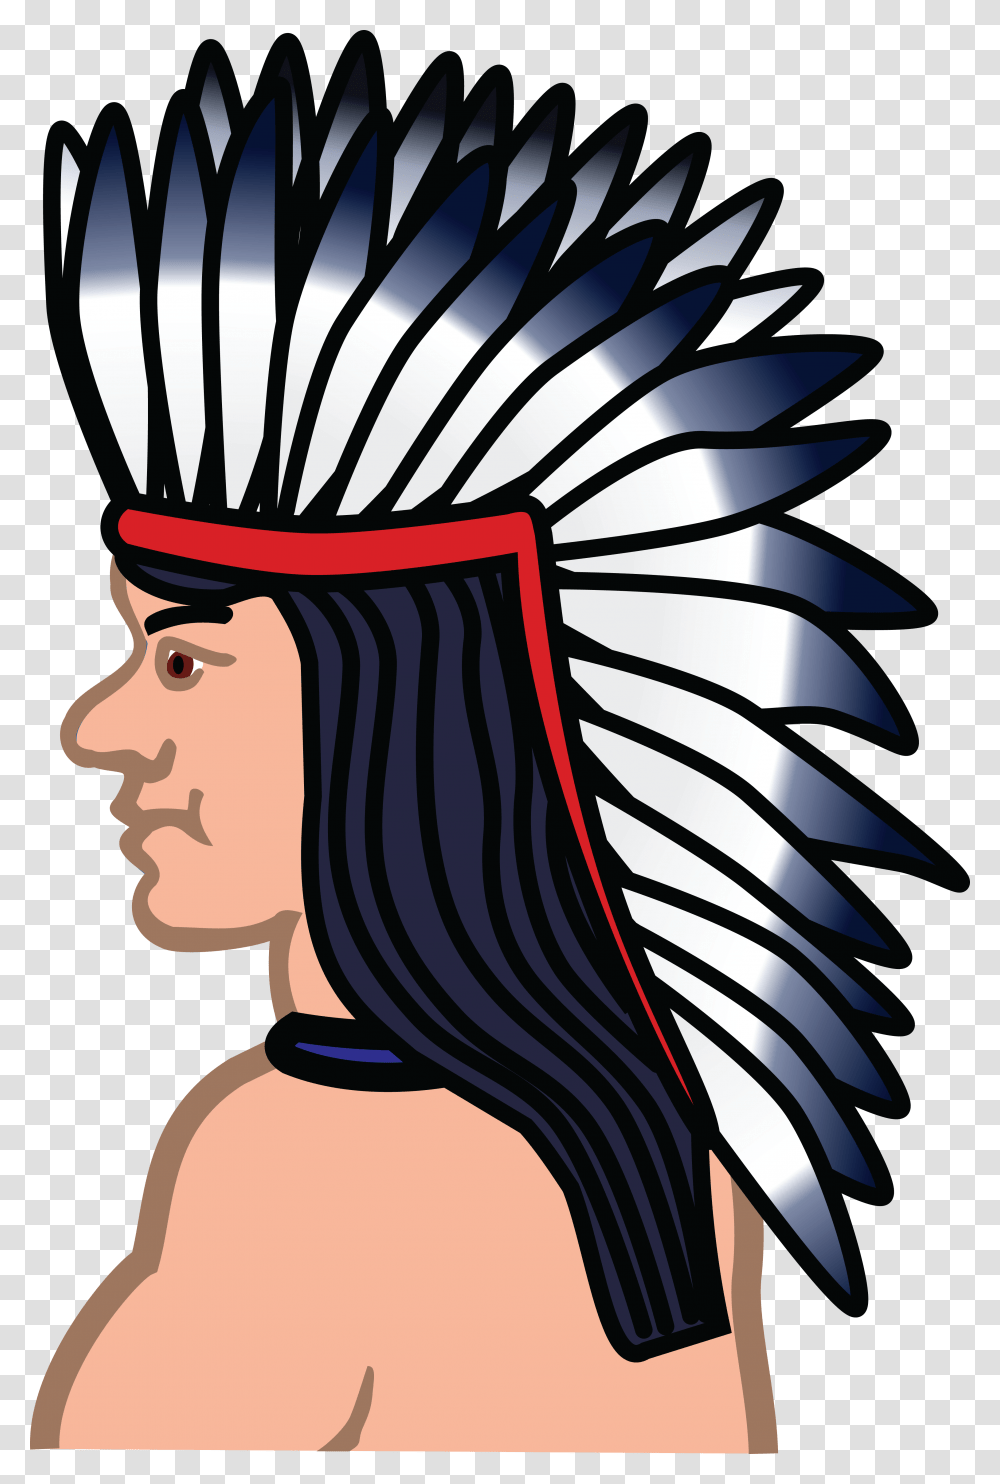 Free Clipart Of A Native American Indian, Label Transparent Png